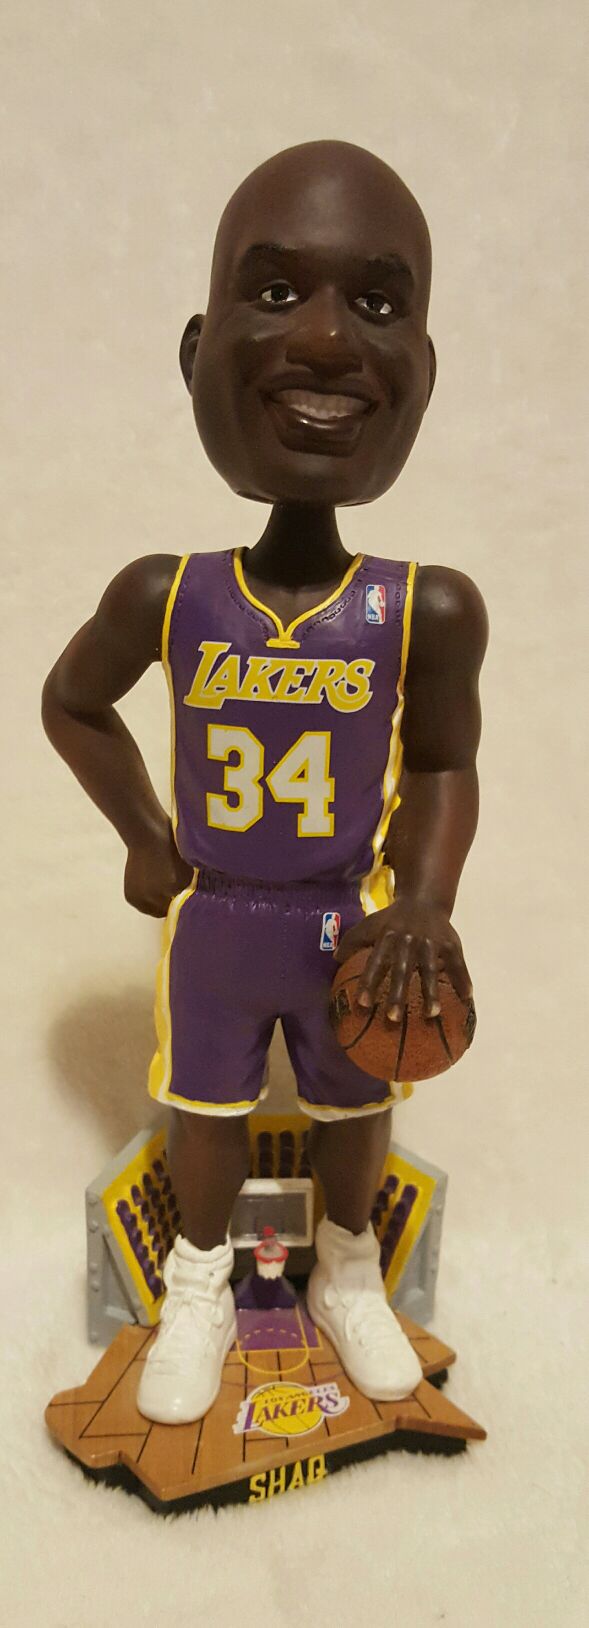 SHAQUILLE O'NEAL BOBBLEHEAD, FOREVER COLLECTIBLES LIMITED EDITION, LOS ANGELES LAKERS